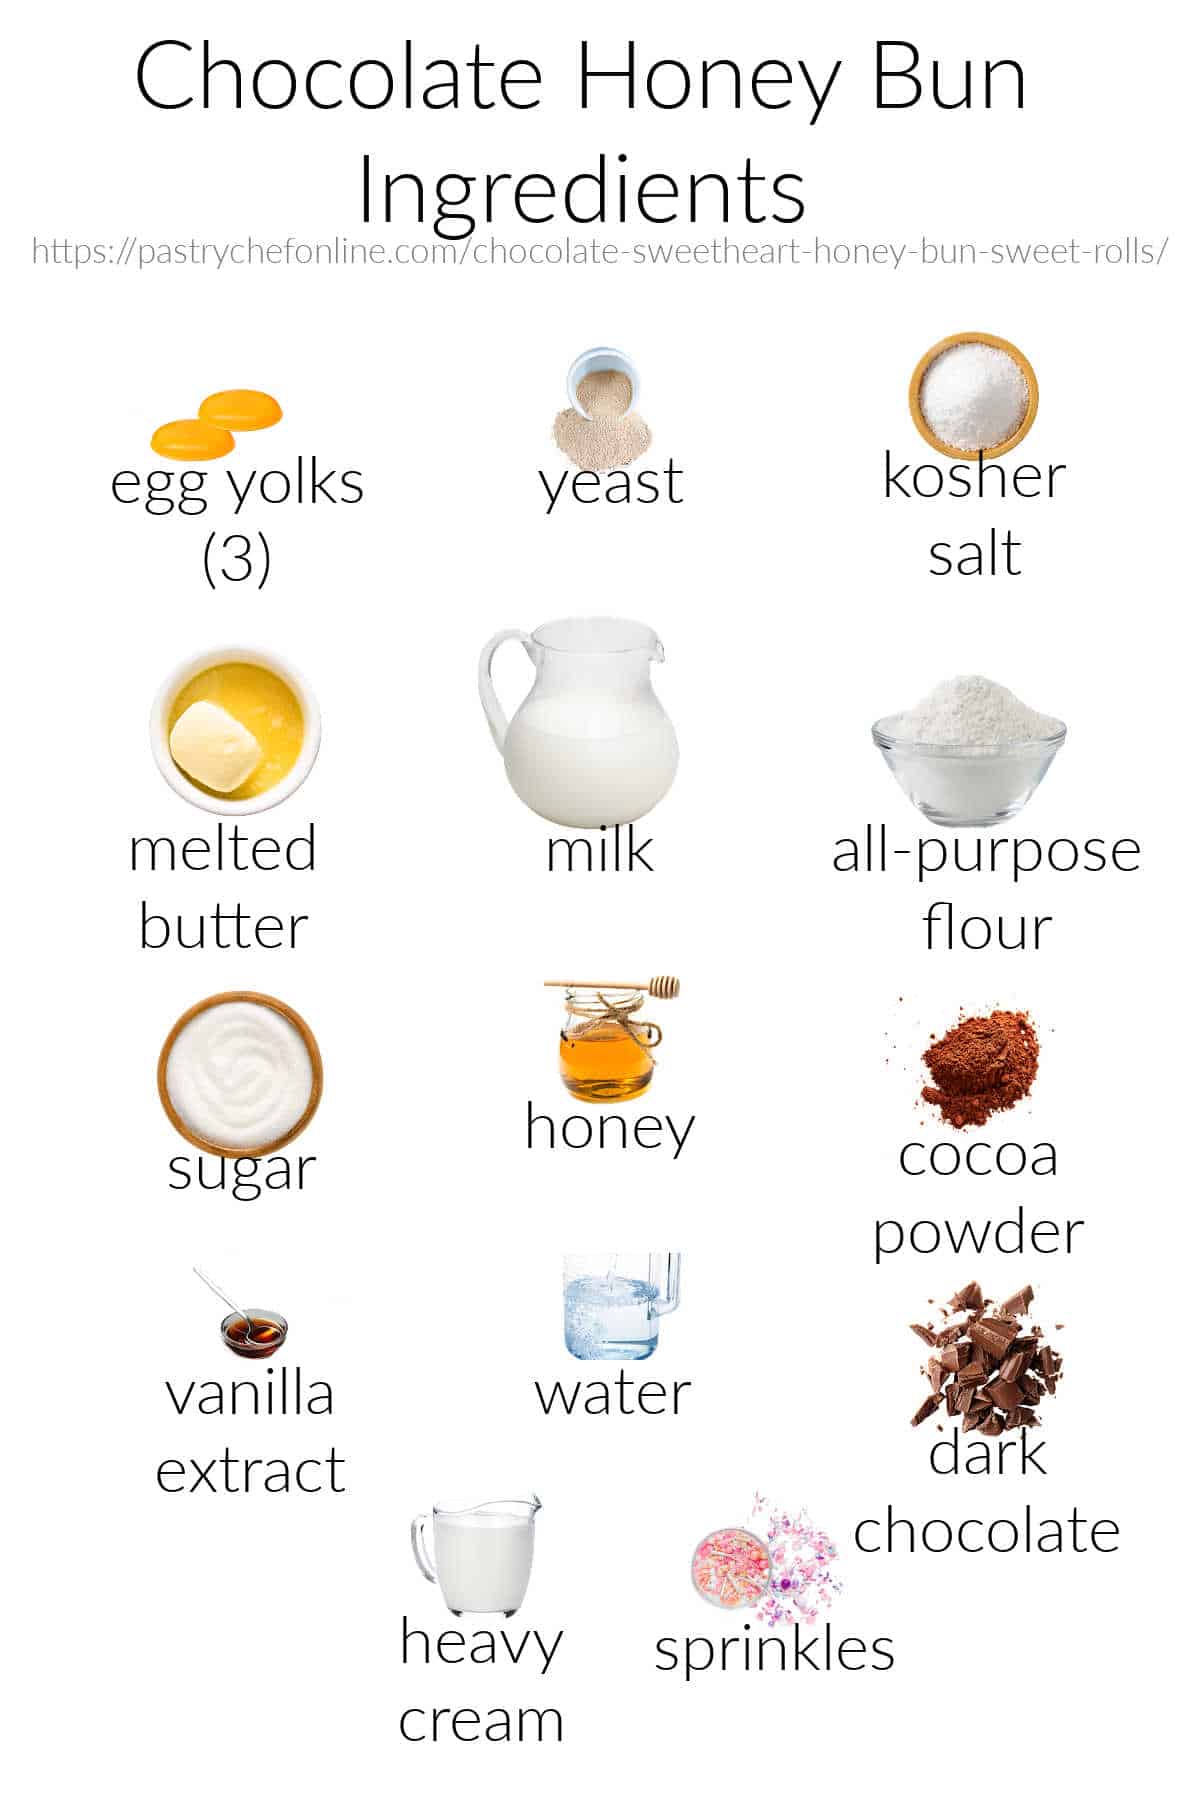 All the ingredients for making chocolate honey buns including for the dough, filling, glaze, and ganache. All ingredients are labeled and on a white background.